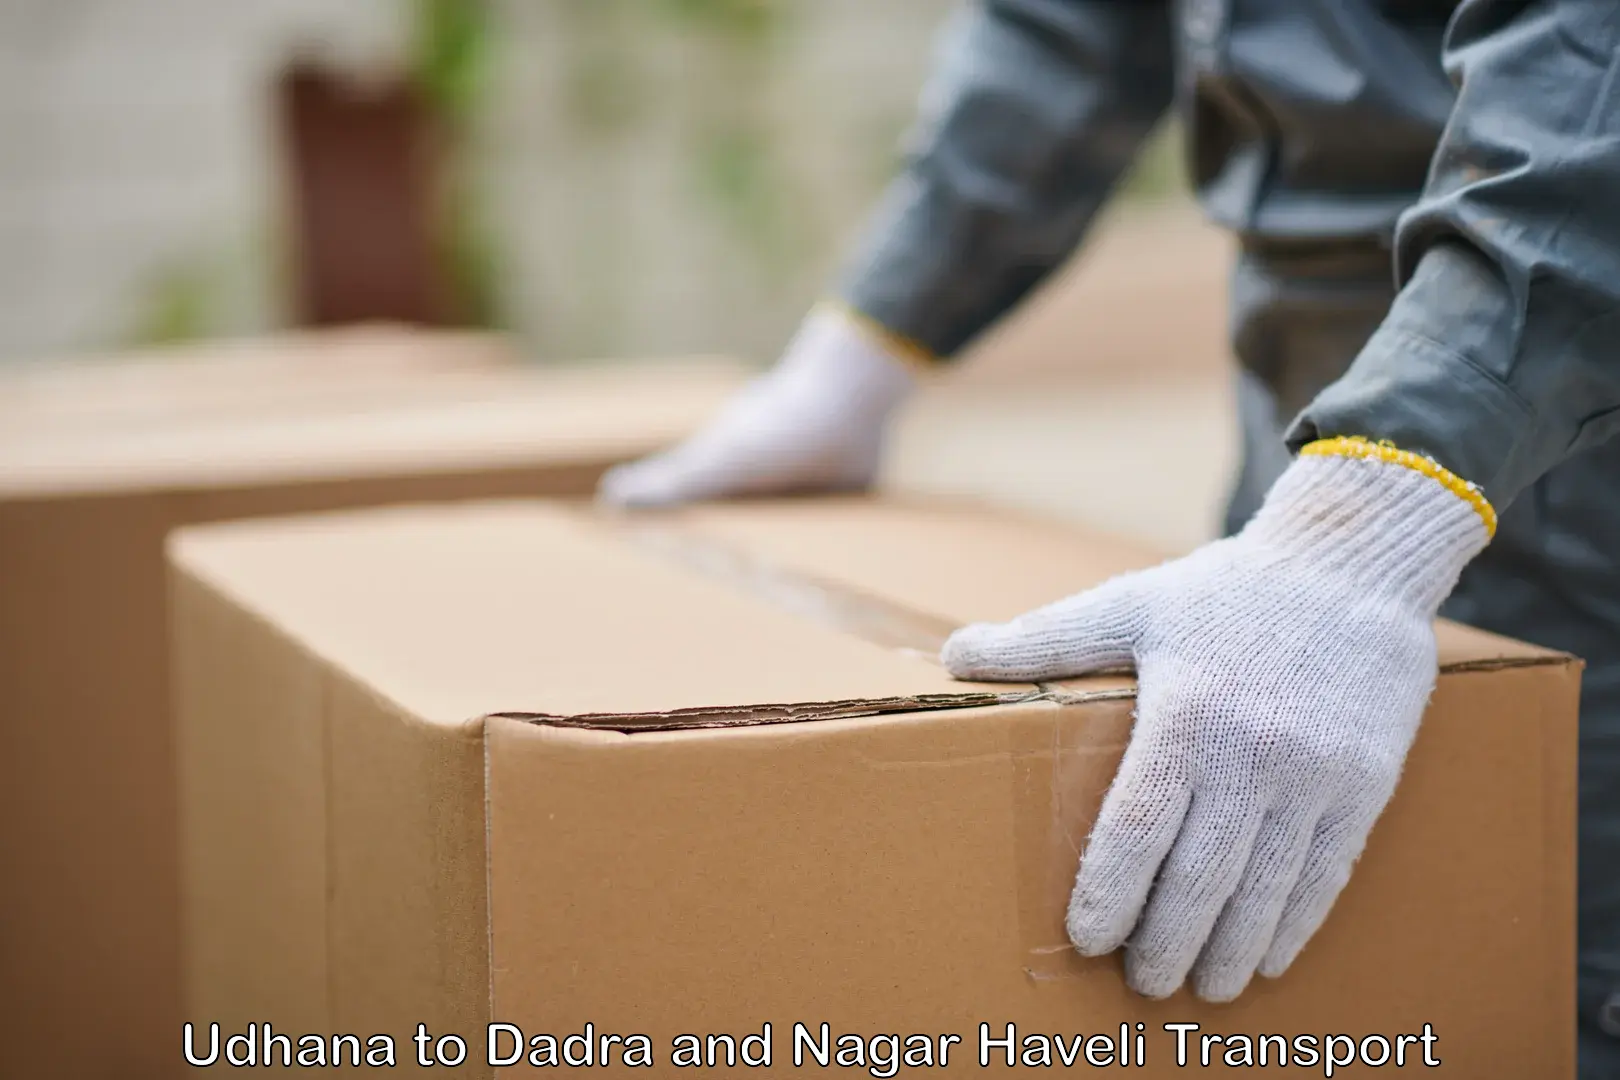 Road transport services in Udhana to Dadra and Nagar Haveli